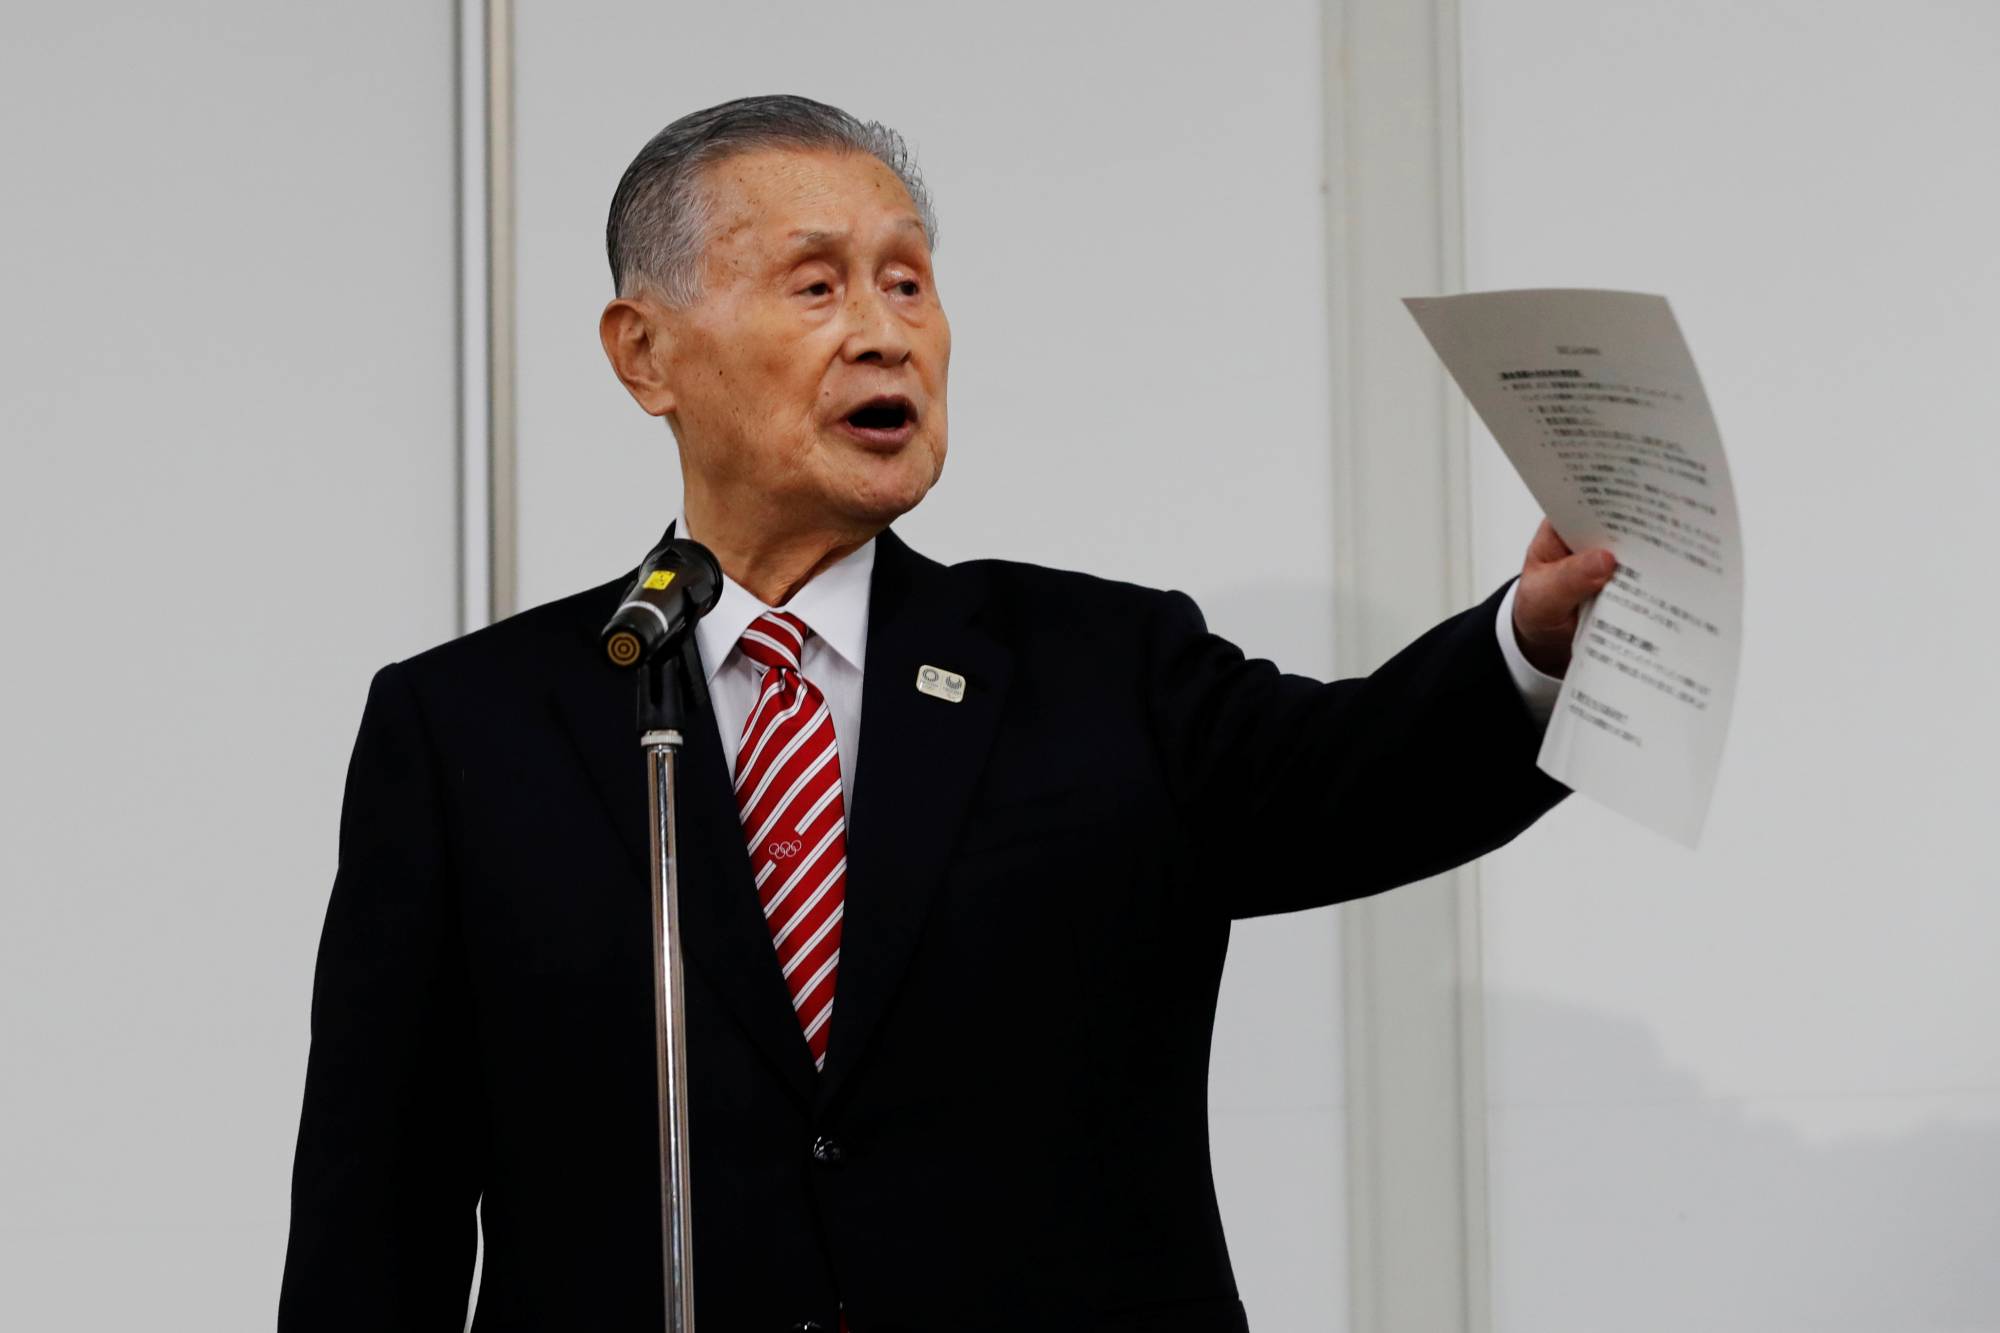 Yoshiro Mori, head of the Tokyo Olympic organizing committee, apologizes for his sexist remarks, at a news conference in Tokyo on Thursday. | POOL / VIA REUTERS